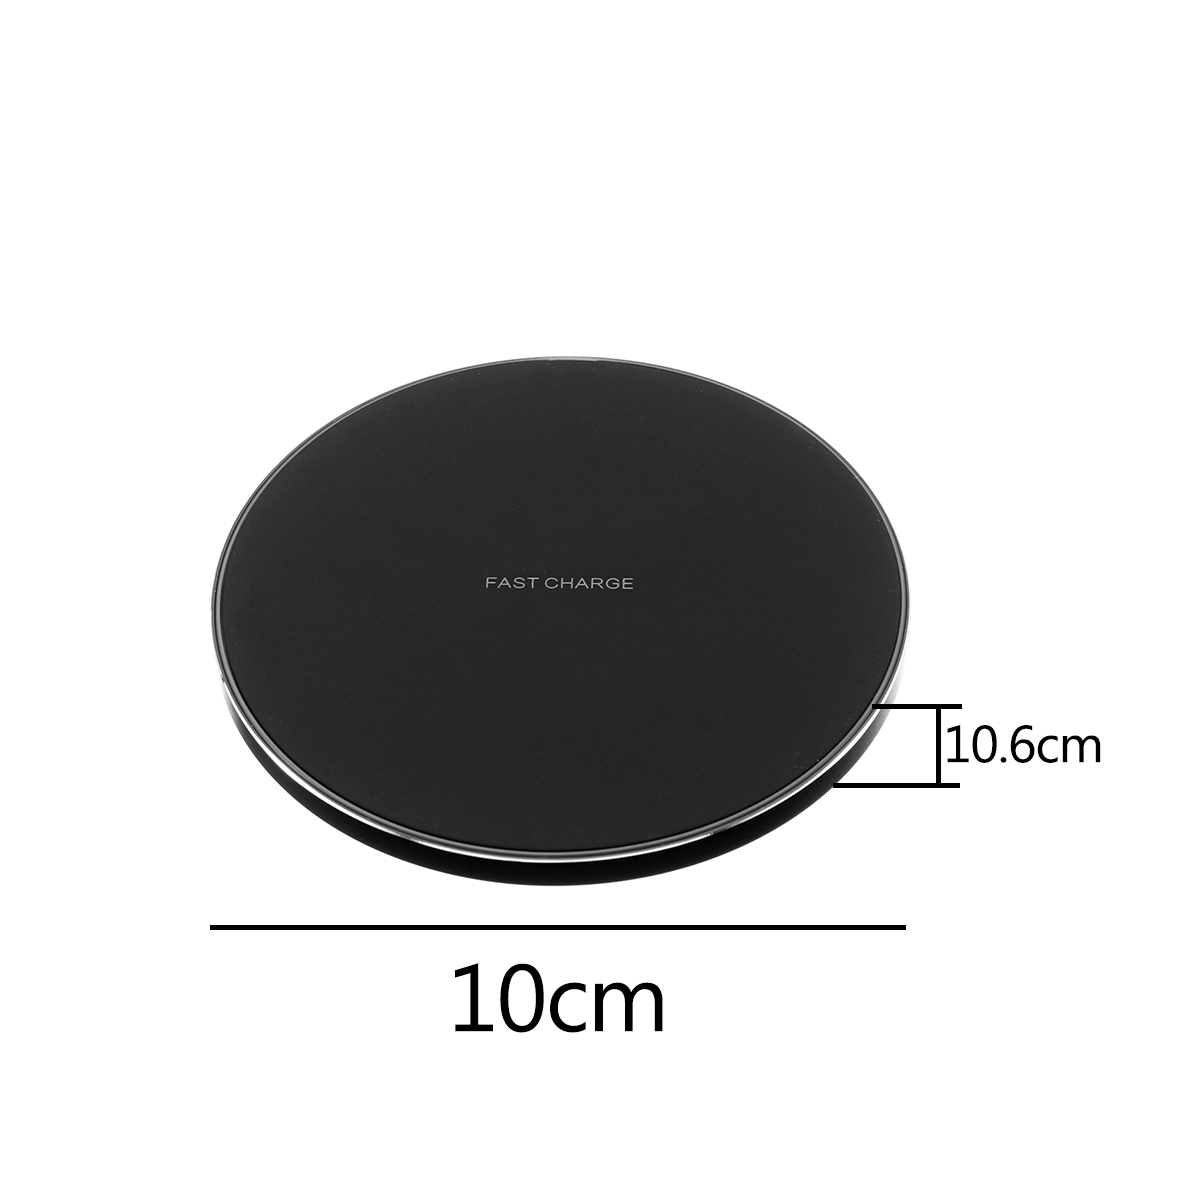 Bakeey Qi Wireless Charger For iPhone X 8 8Plus Samsung S8 Note8